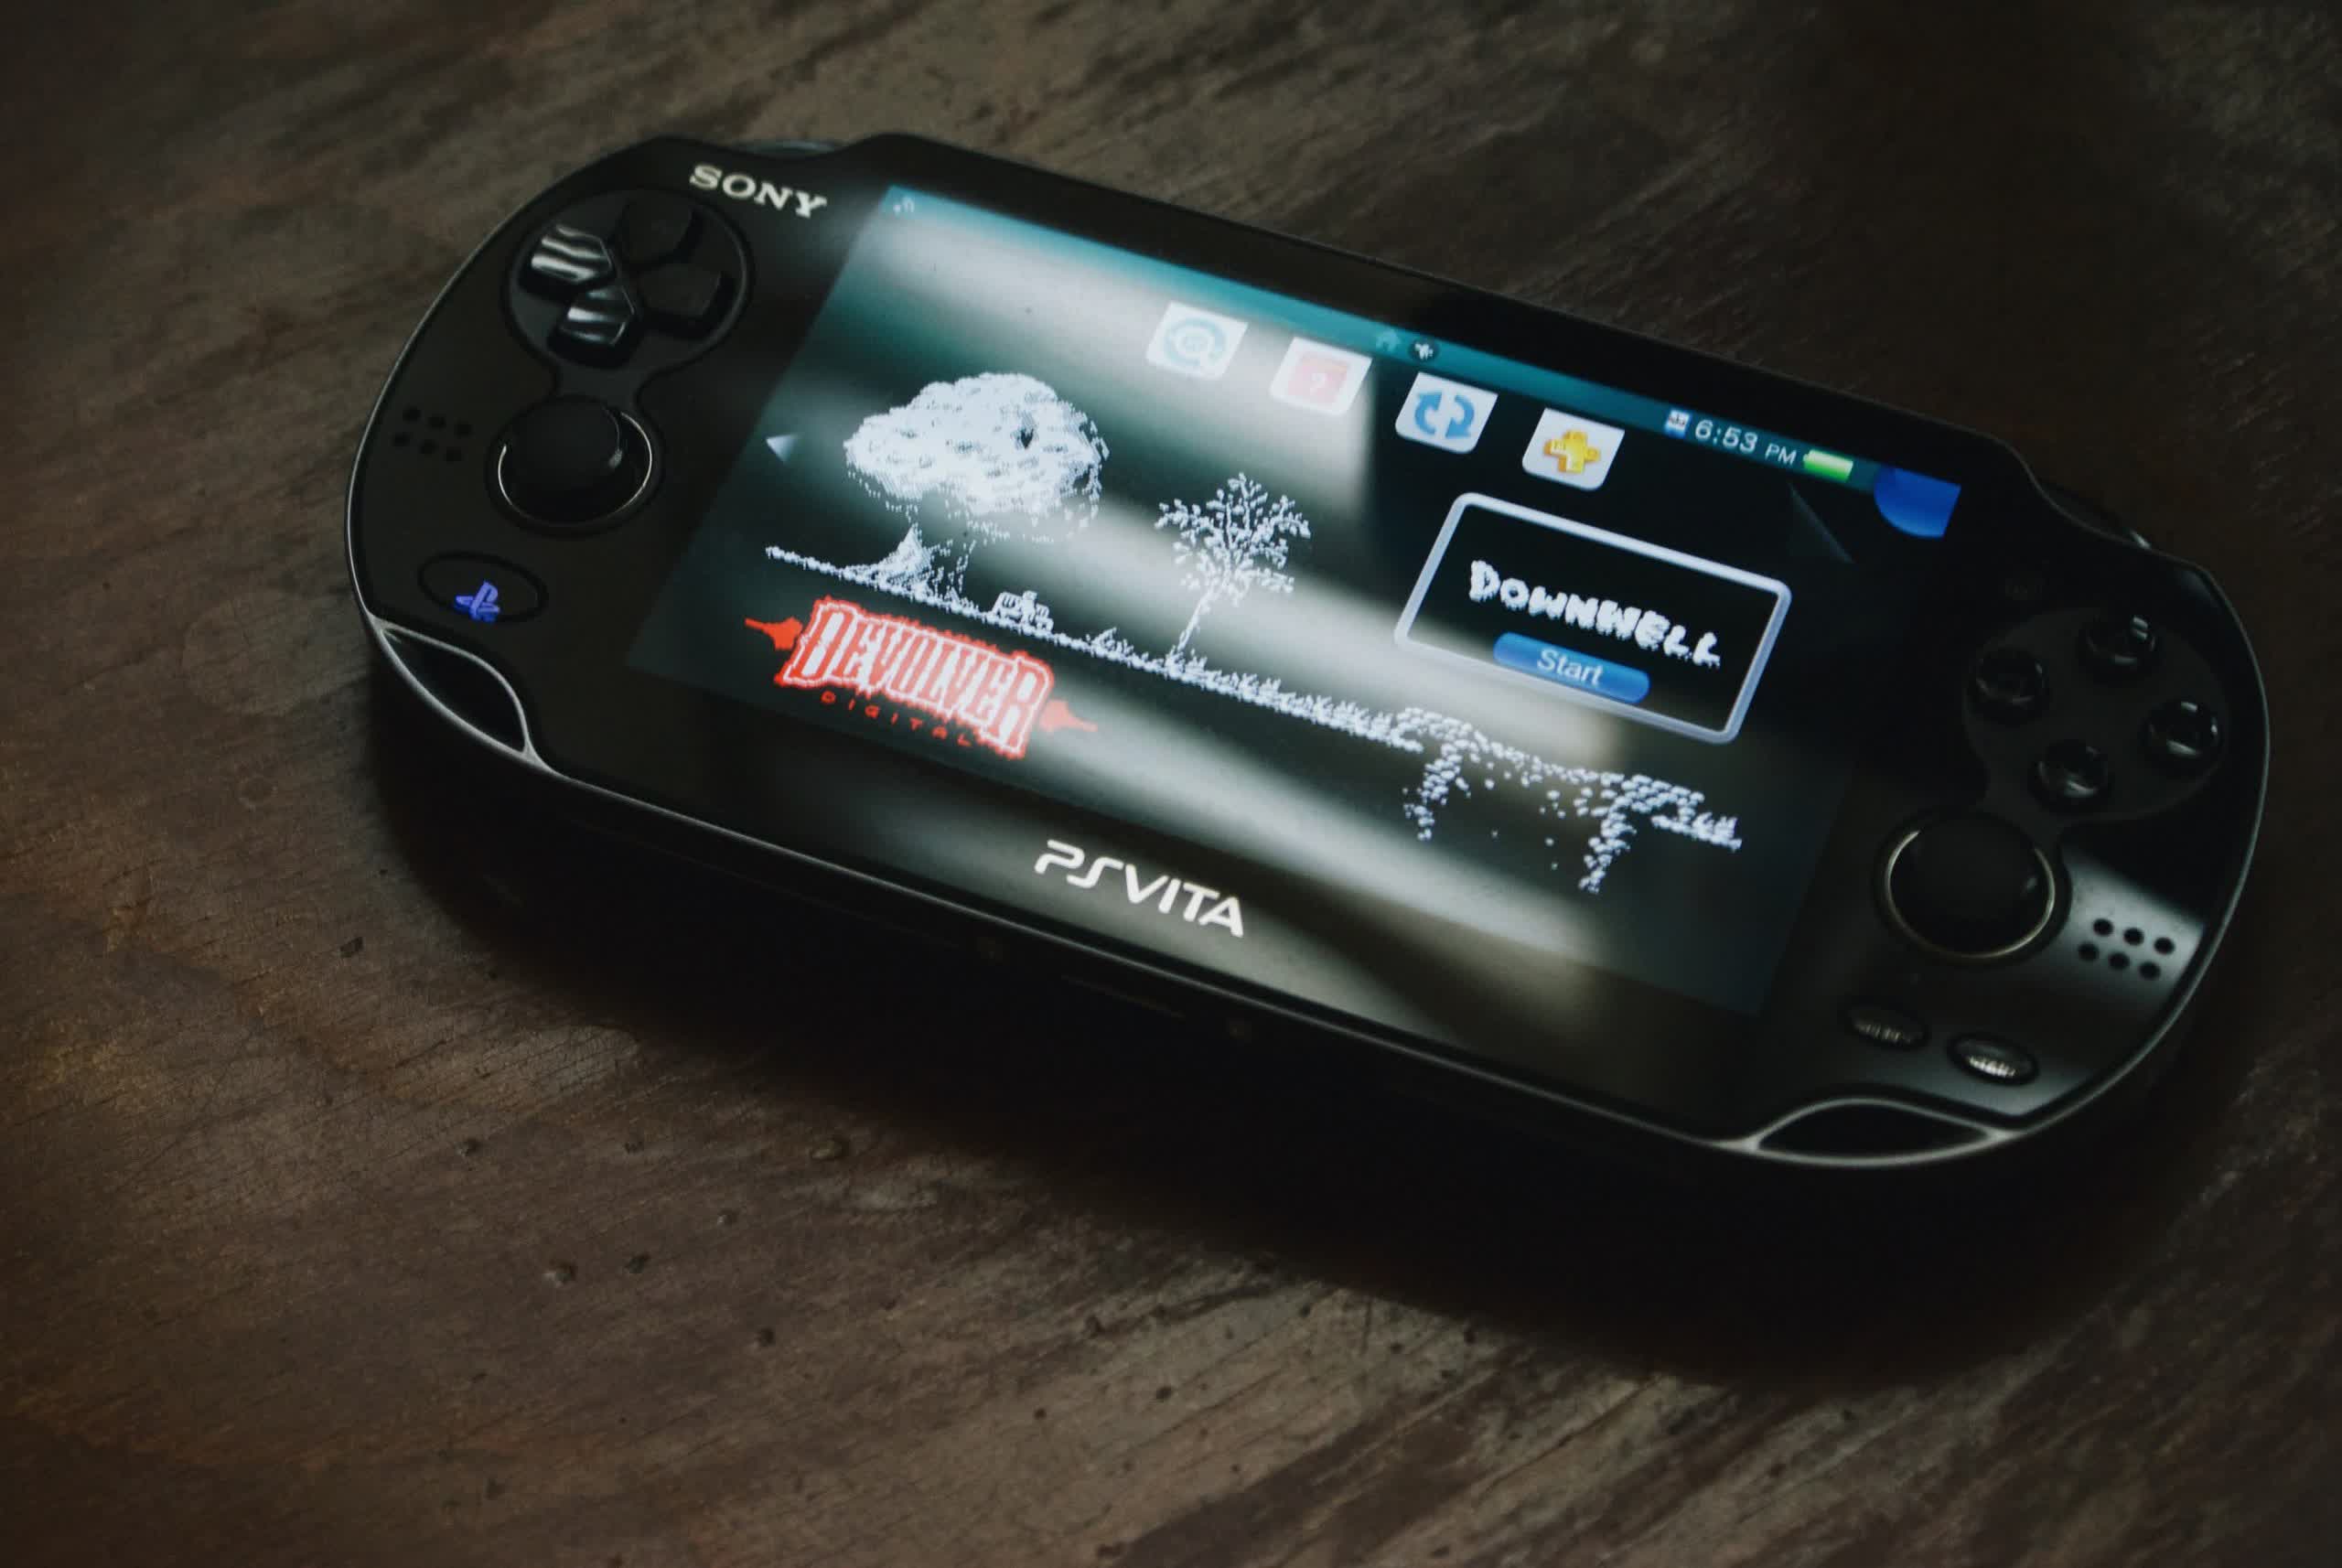 The PSP store is officially closed, but users can still buy games through PS3 and Vita stores